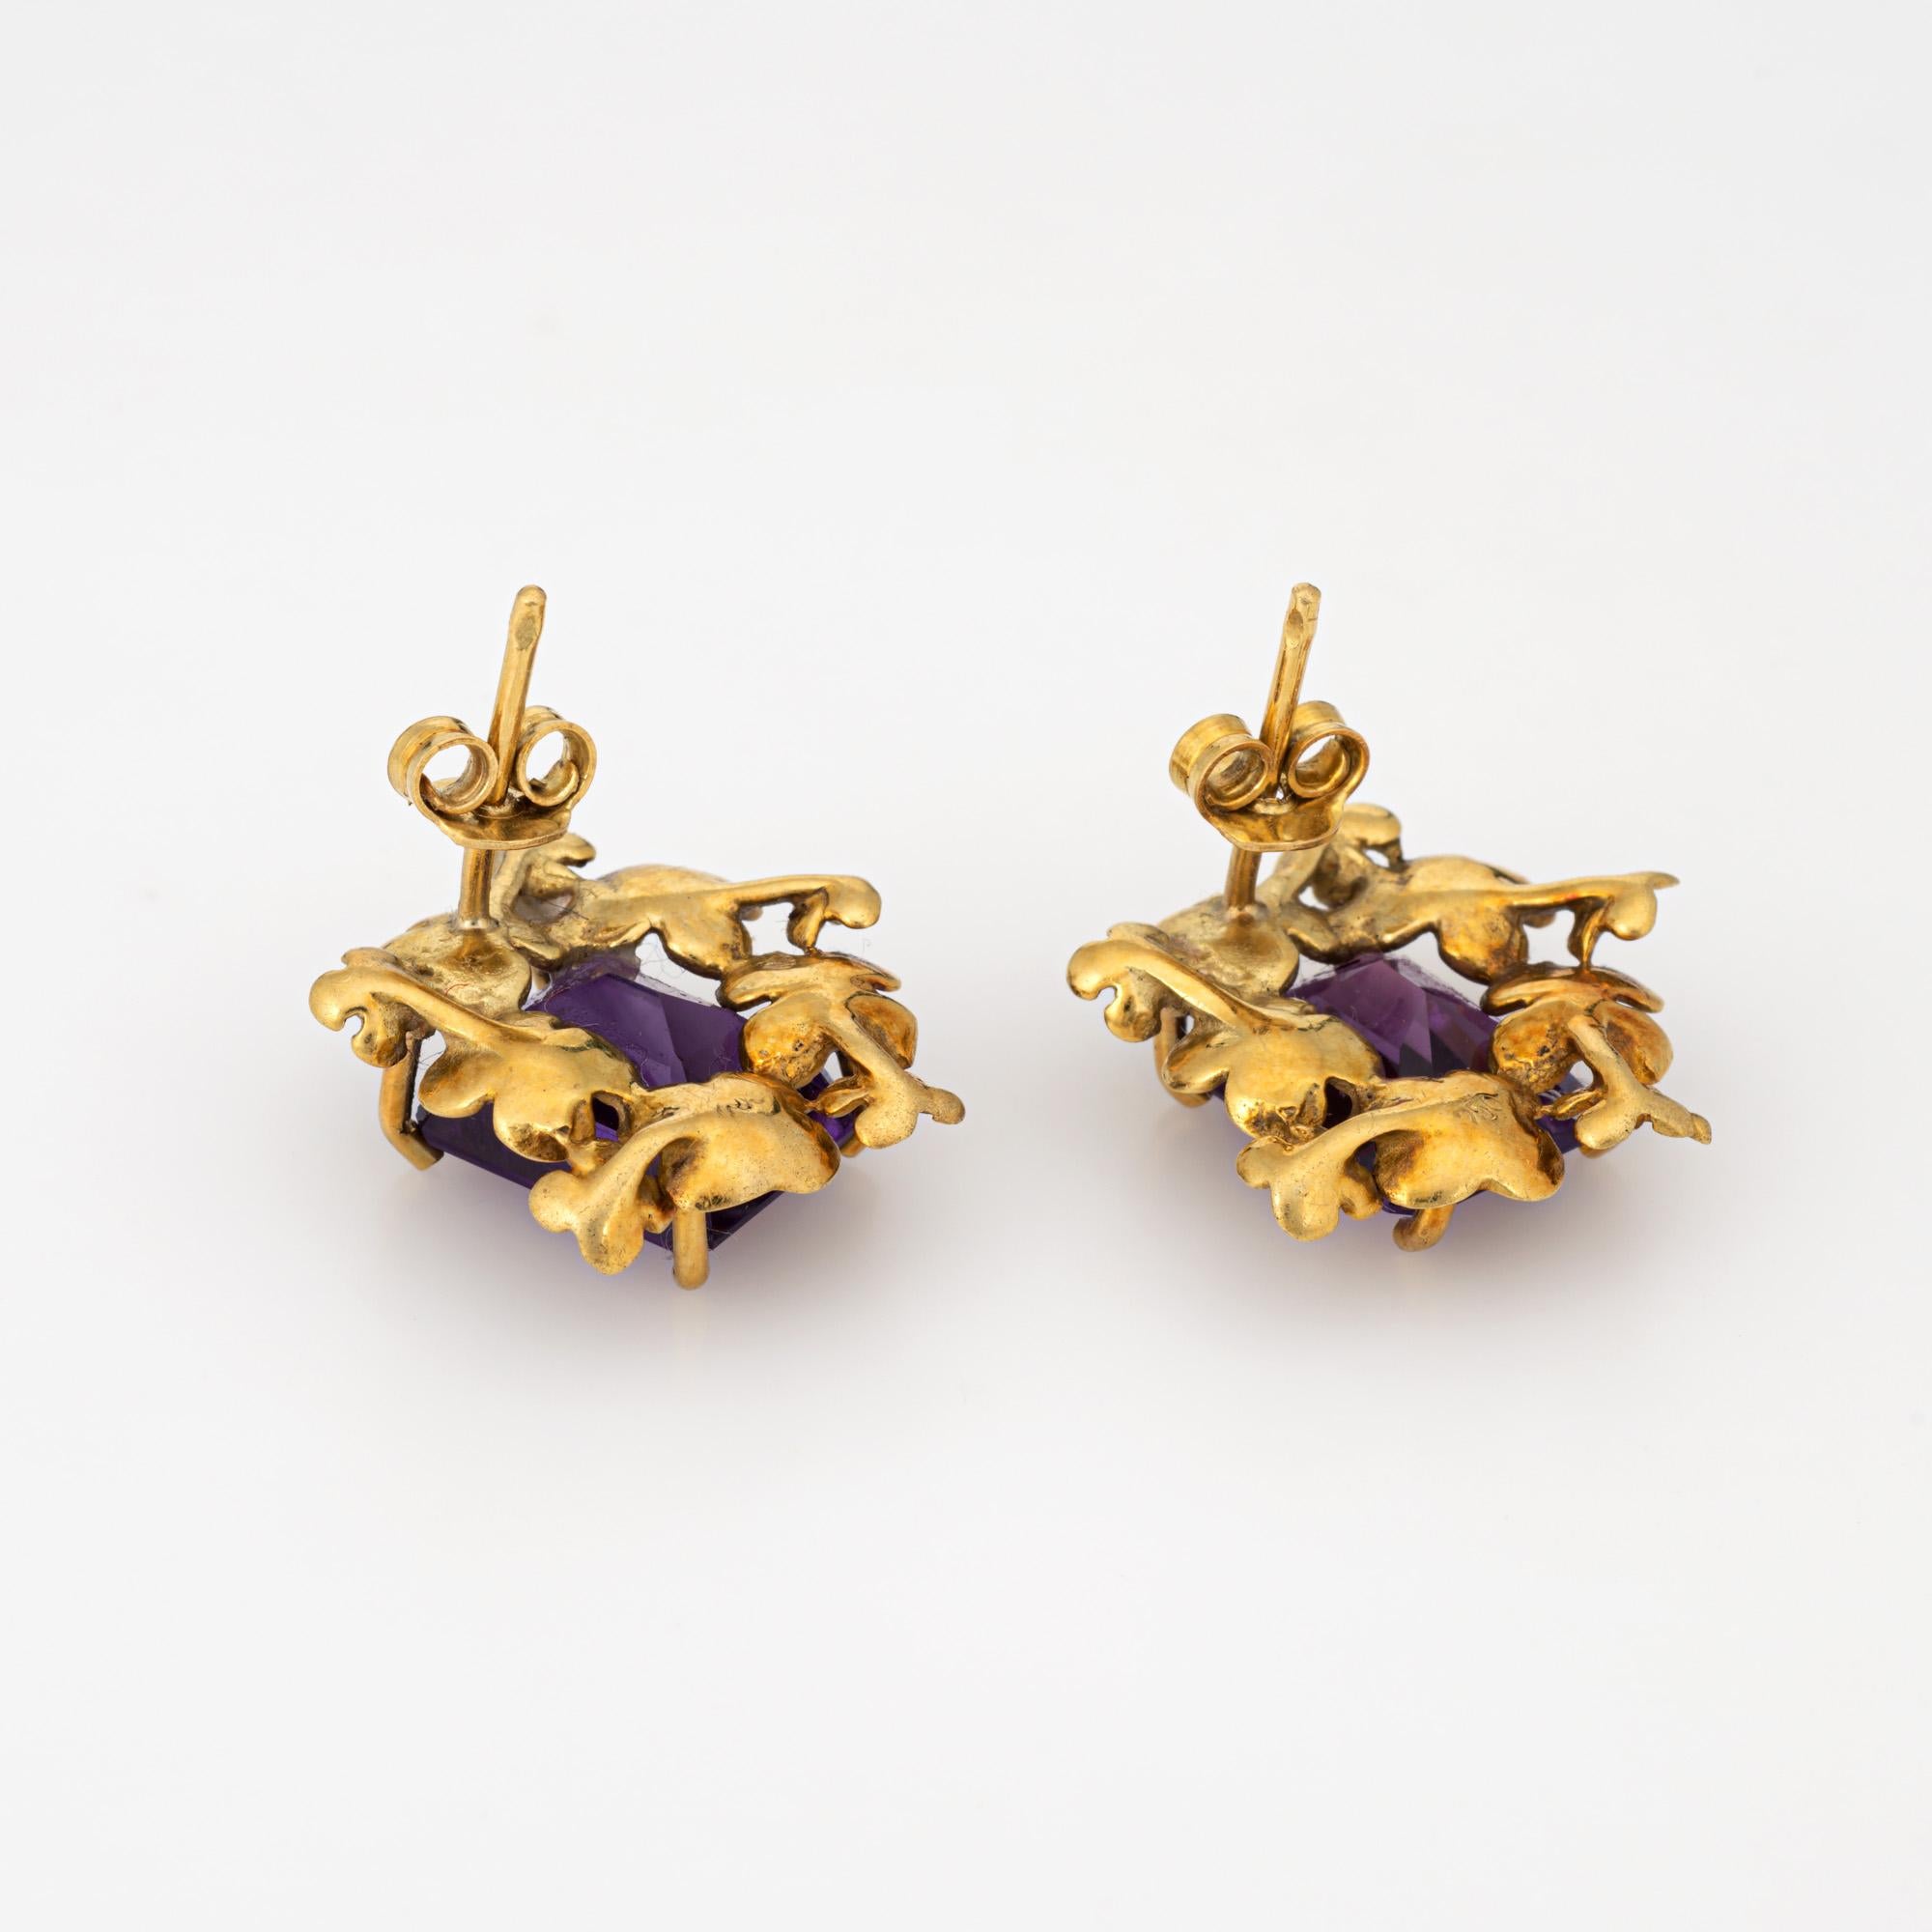 Finely detailed pair of vintage amethyst flower earrings crafted in 18k yellow gold. (circa 1960s to 1970s). 

Emerald cut amethysts measure 11mm x 9mm (estimated at 3.50 carats each - 7 carats total estimated weight). 
The sweet earrings feature a